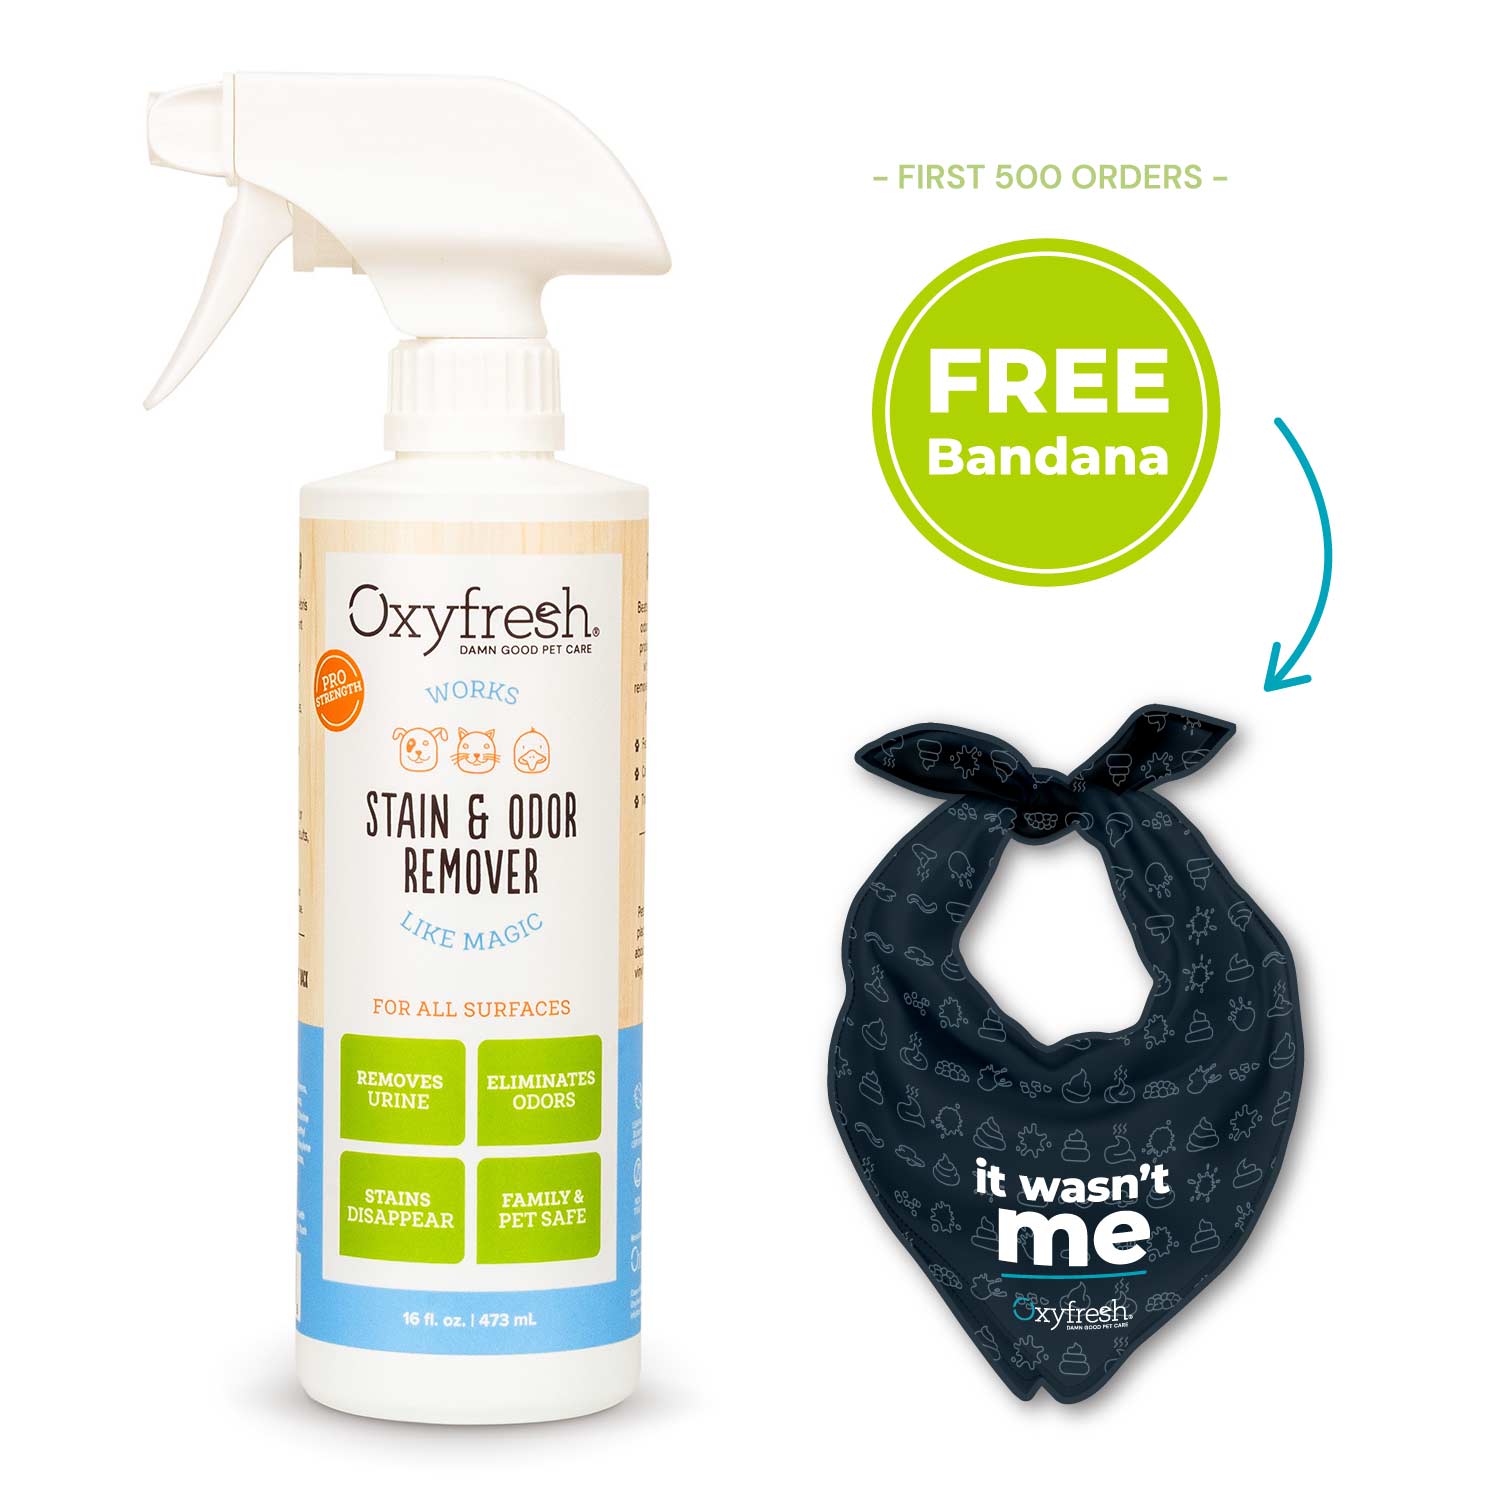 oxyfresh stain and odor remover works like magic to remove urine odors and stains get a free bandana for the first 500 orders